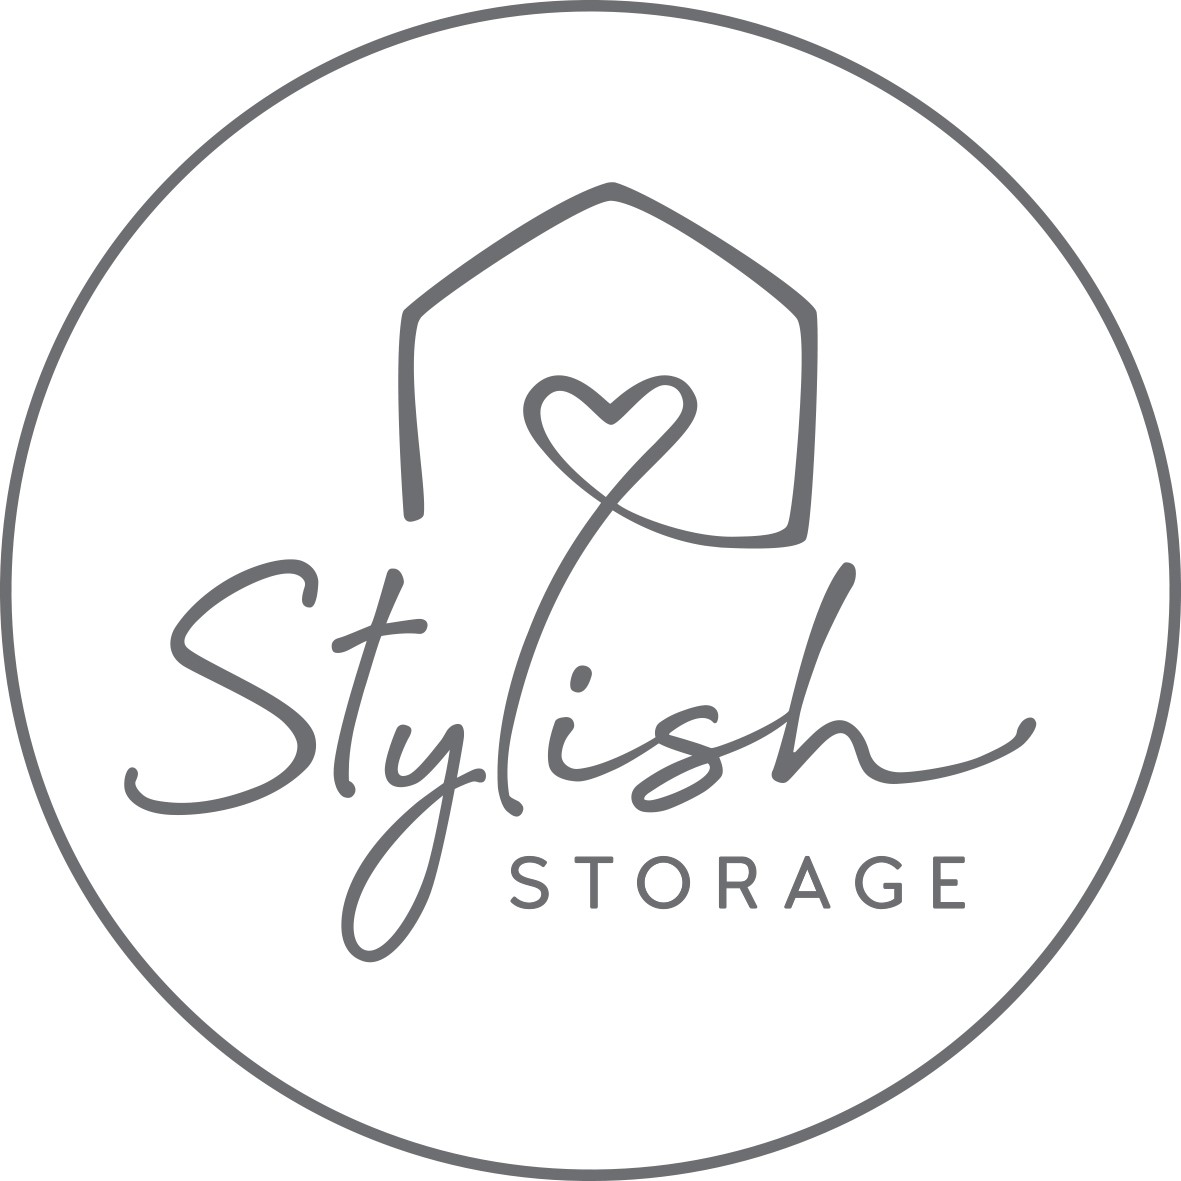 Stylish Storage As Seen In The Block